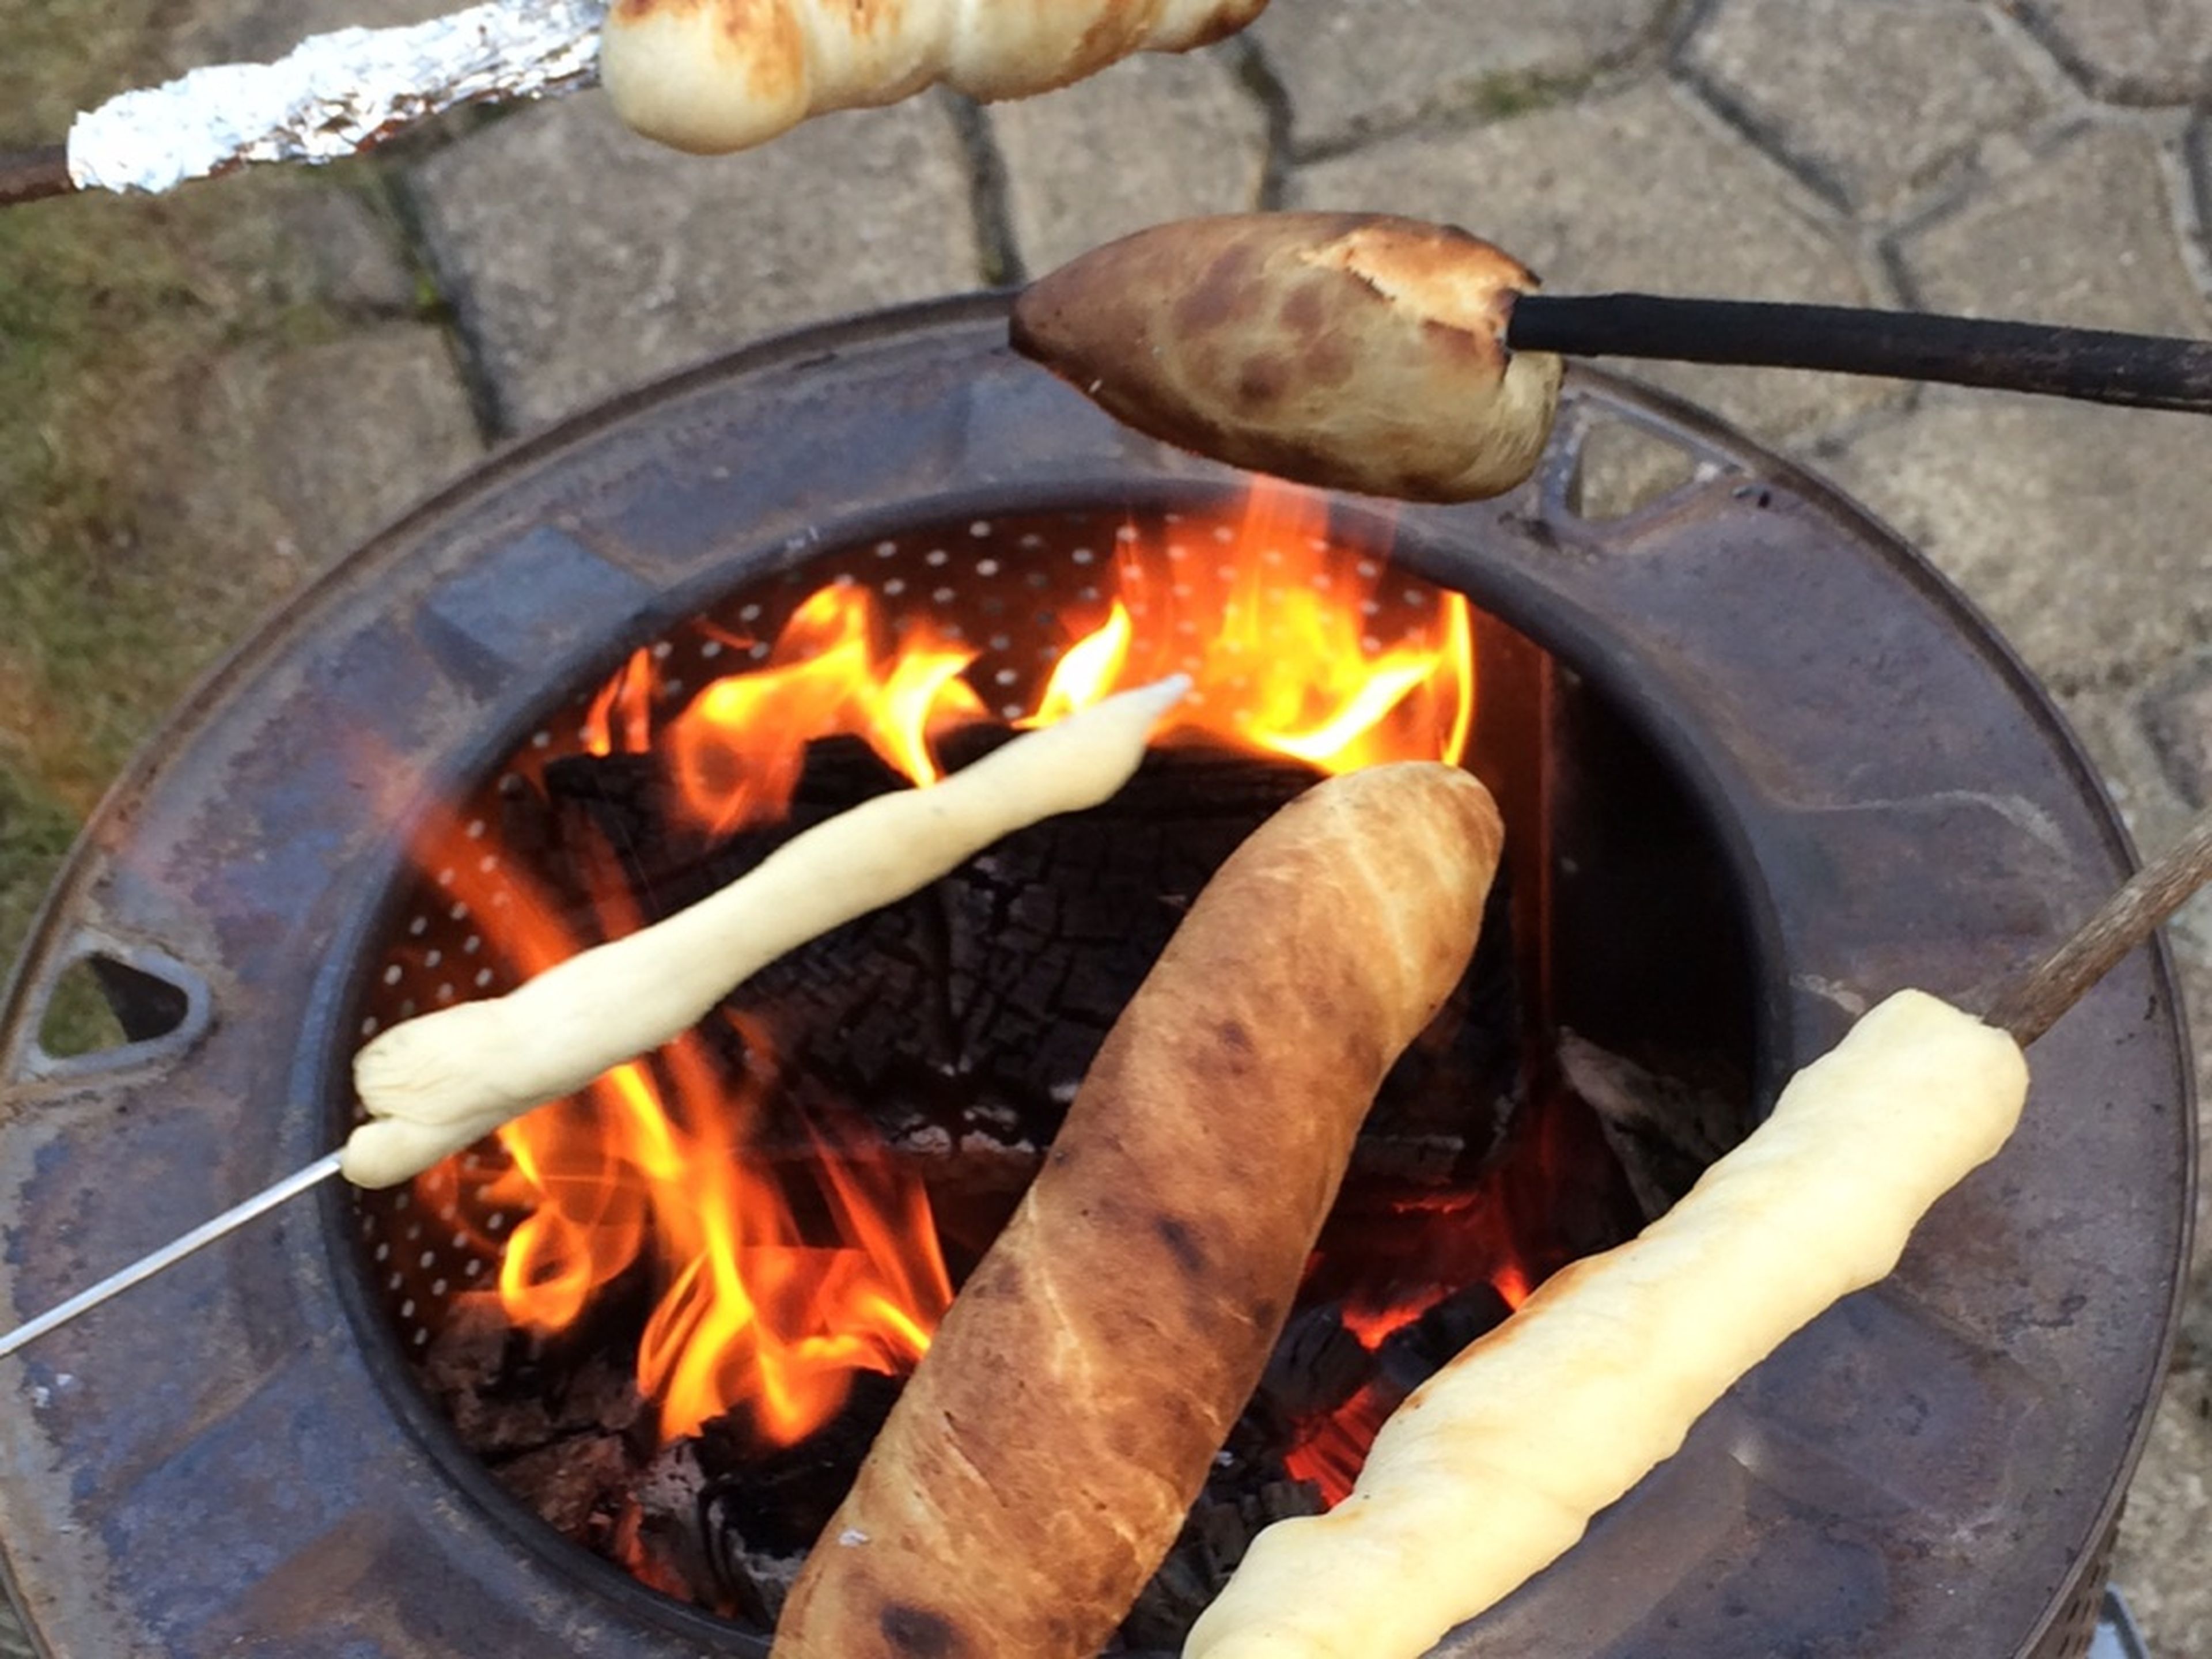 Split dough into small, equal portions, roll into logs, then twist around the ends of clean sticks or skewers. Toast over a fire or grill for approx. 10 – 15 min. until golden brown and cooked through. Enjoy!